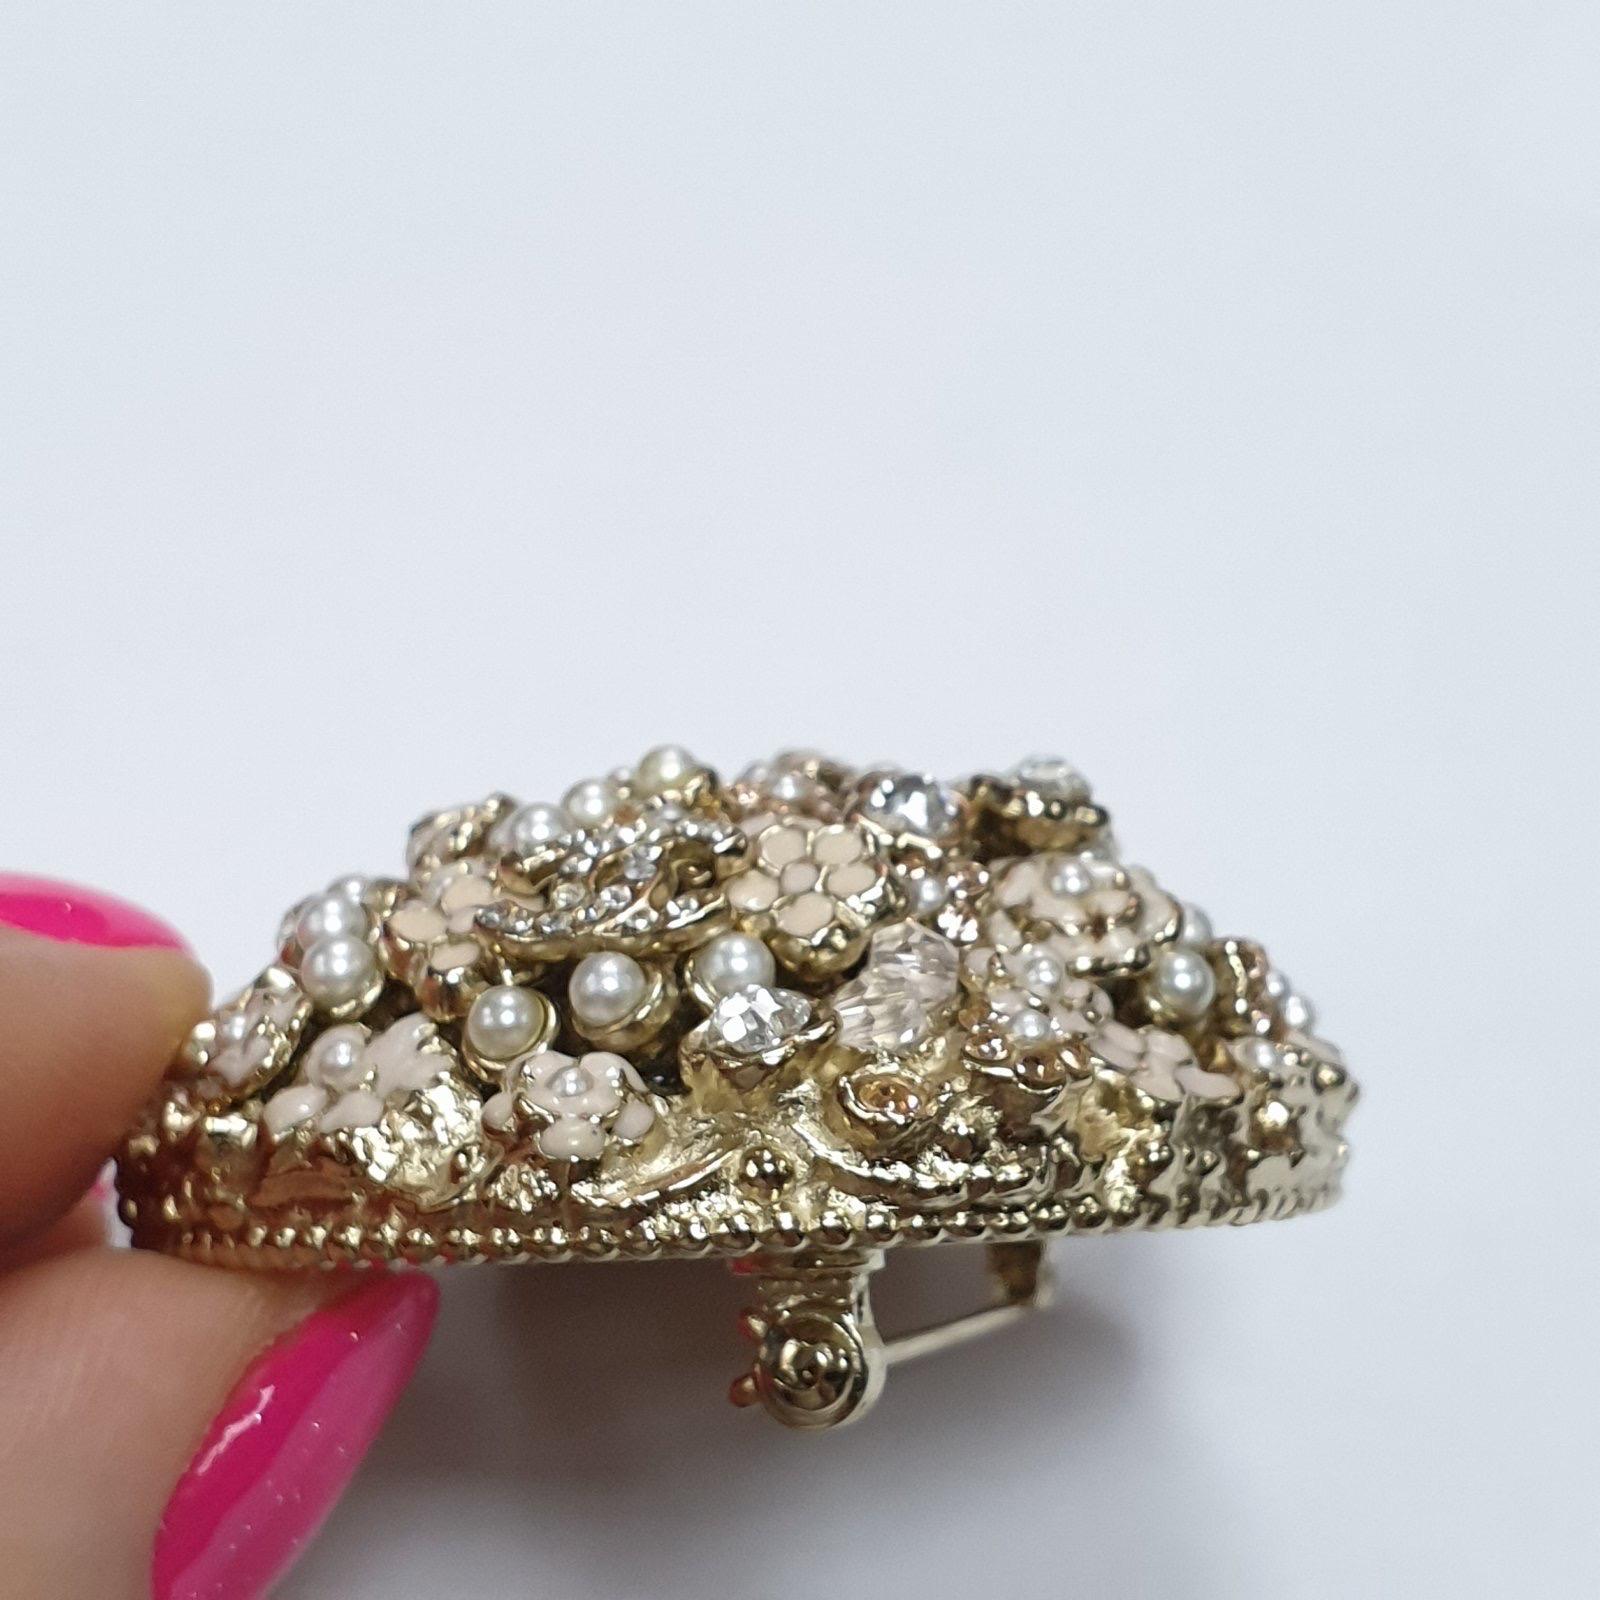 Chanel 11A Round Faux Pearls Brooch For Sale 1